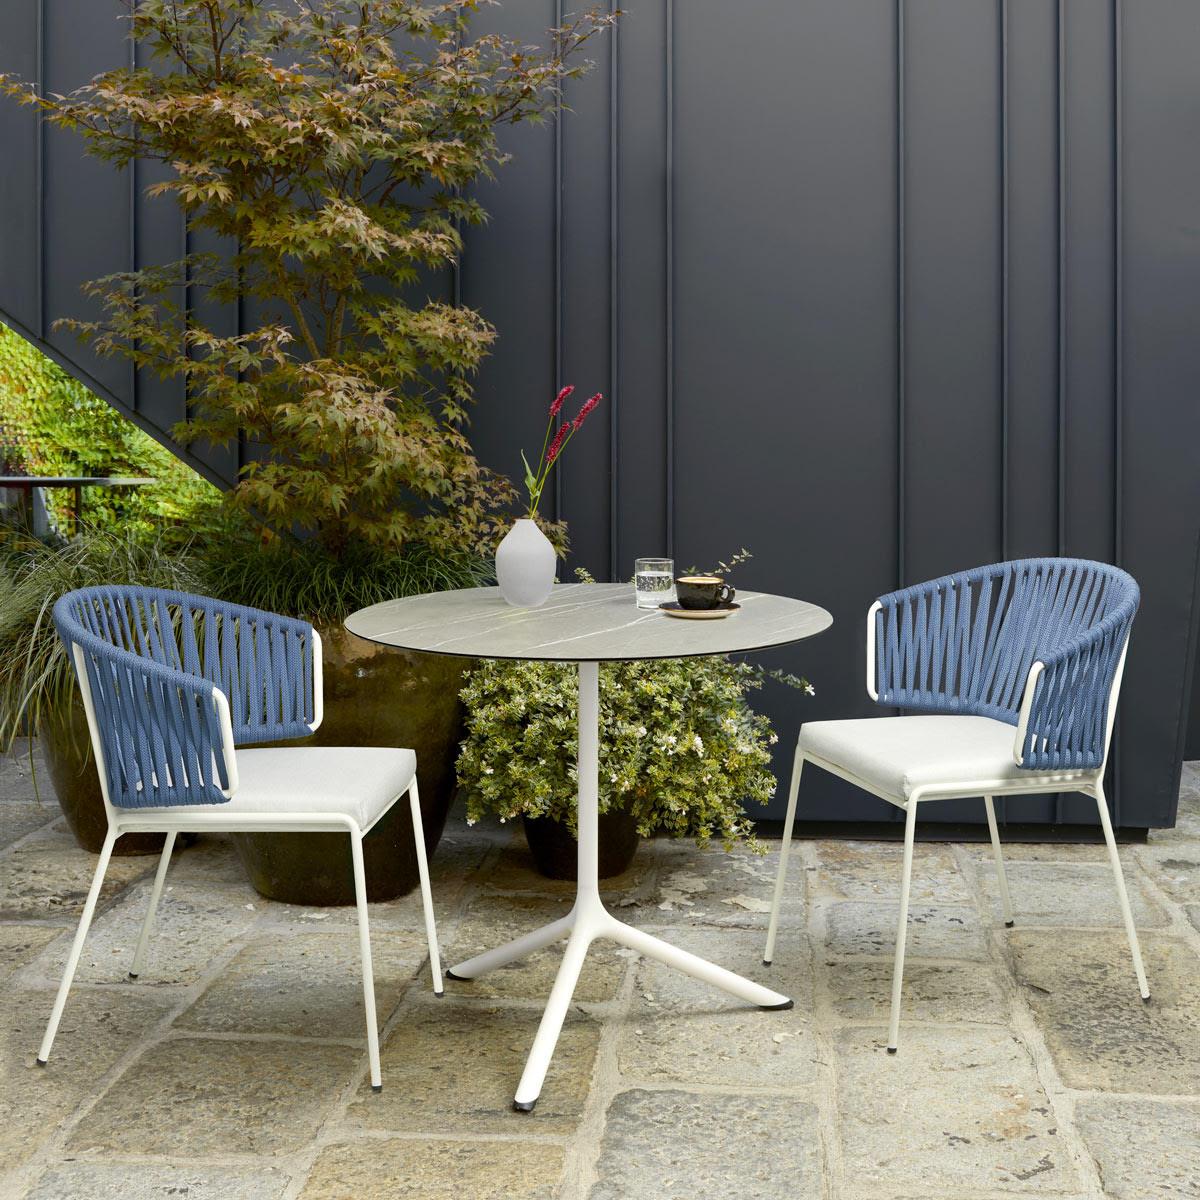 Pair of Blue Outdoor or Indoor Metal and Cord Armchairs, 21 century For Sale 3